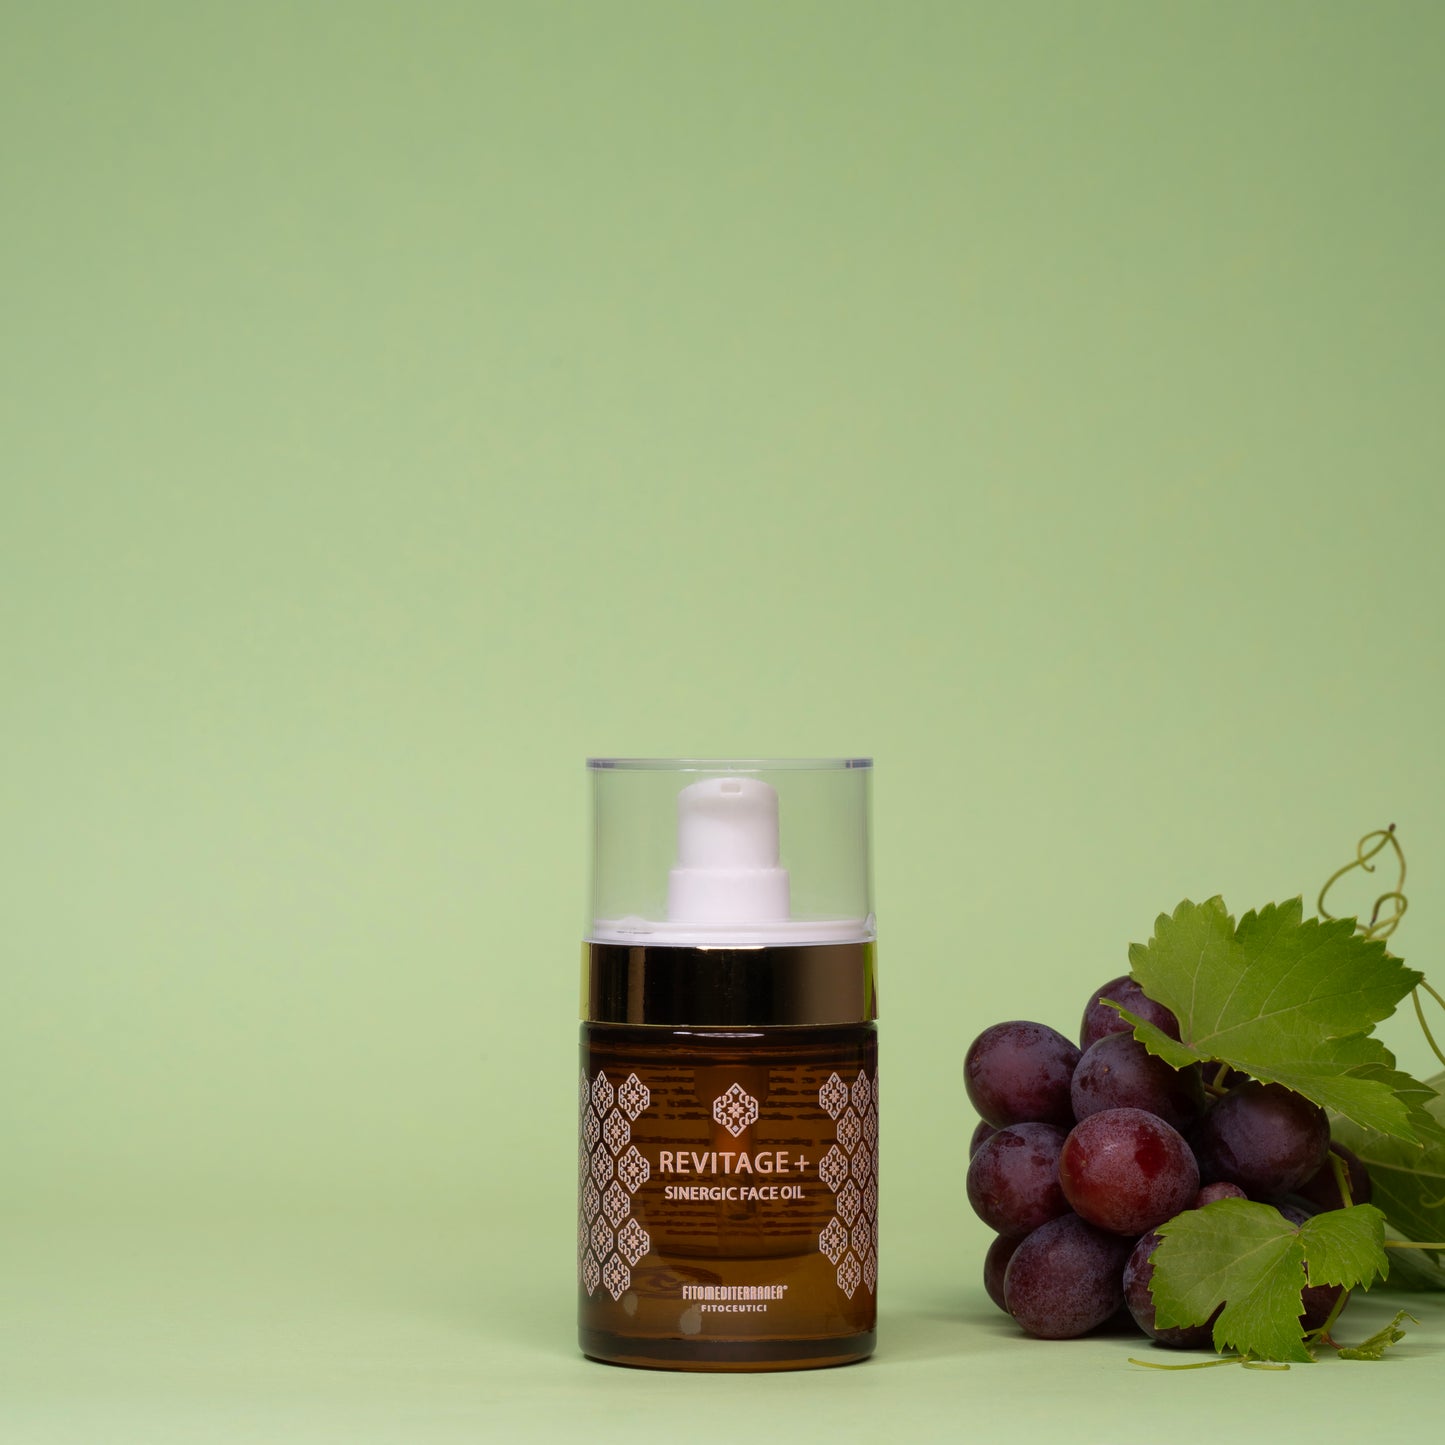 Synergic Face Oil